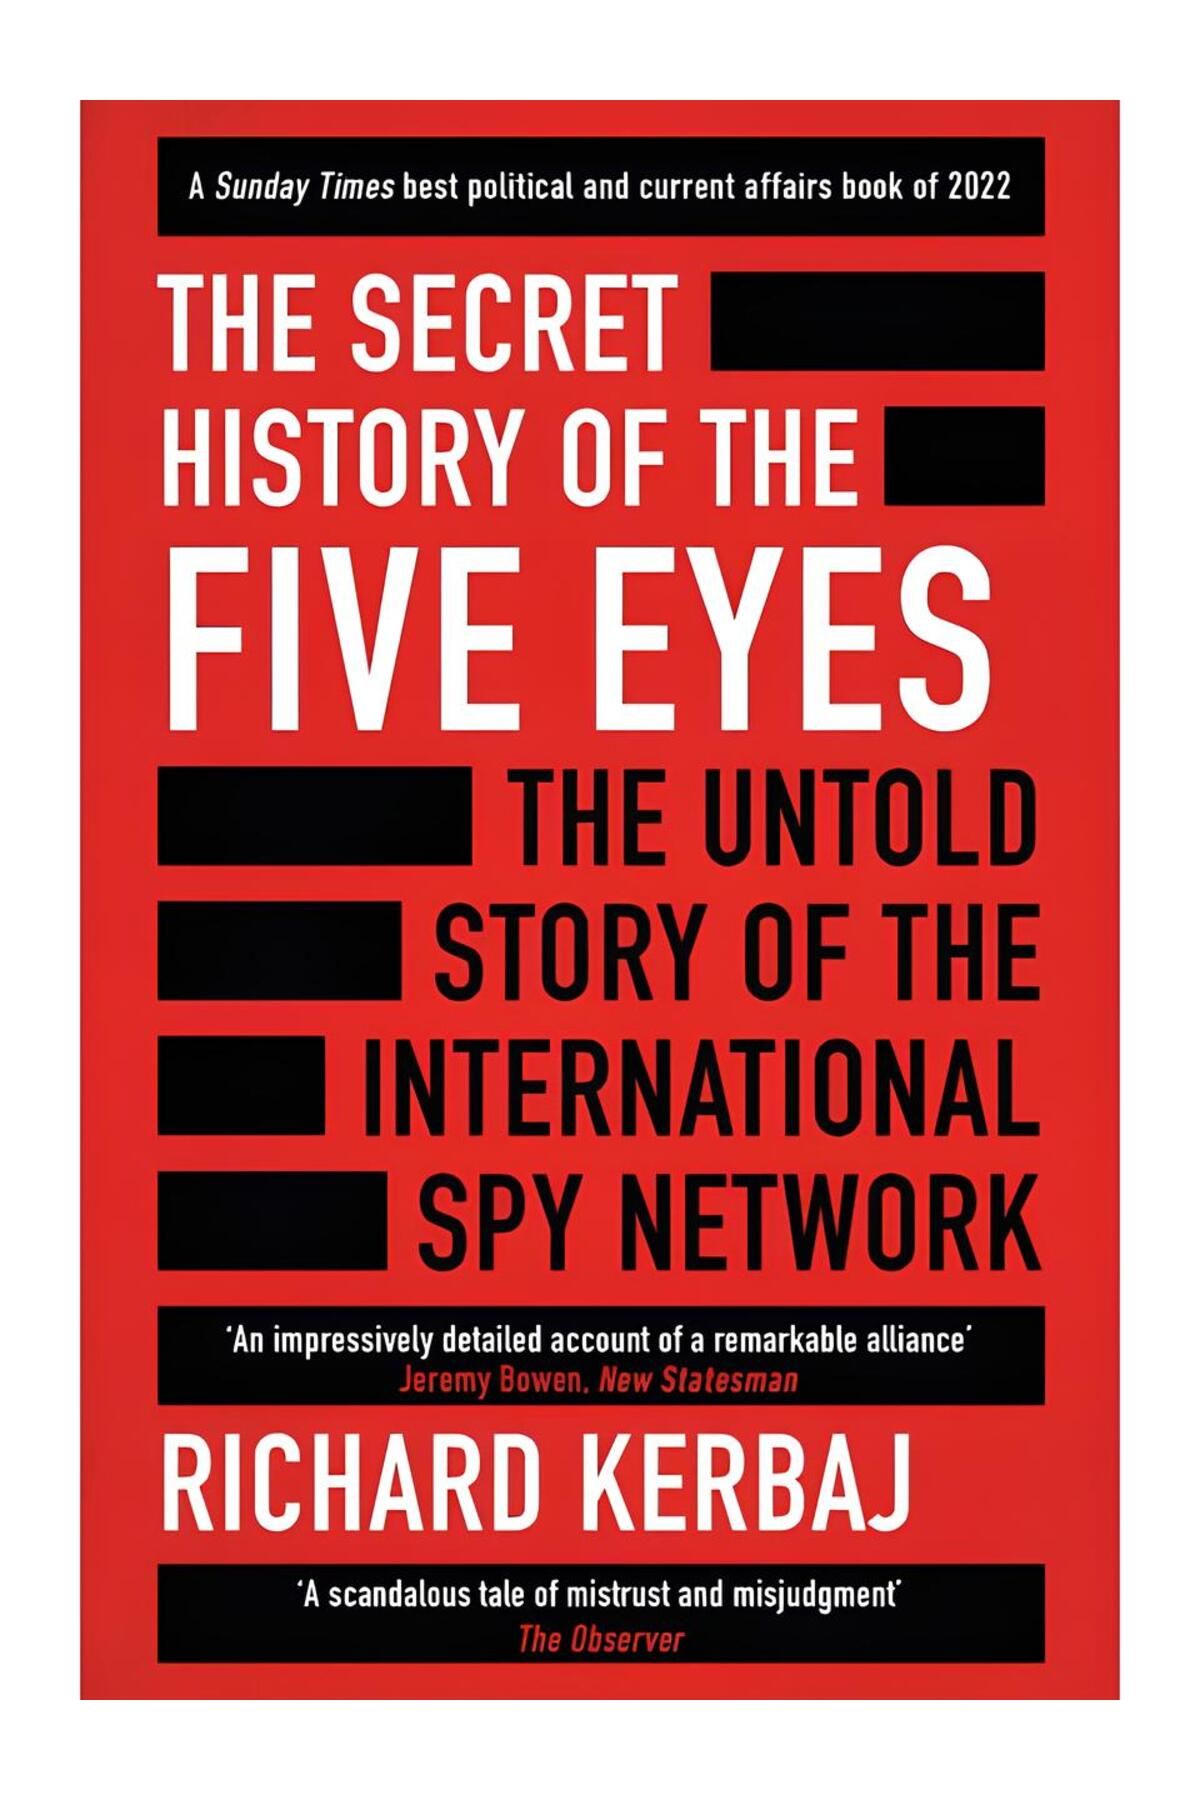 Blink The Secret History of the Five Eyes The Untold Story of the Shadowy International Spy Network